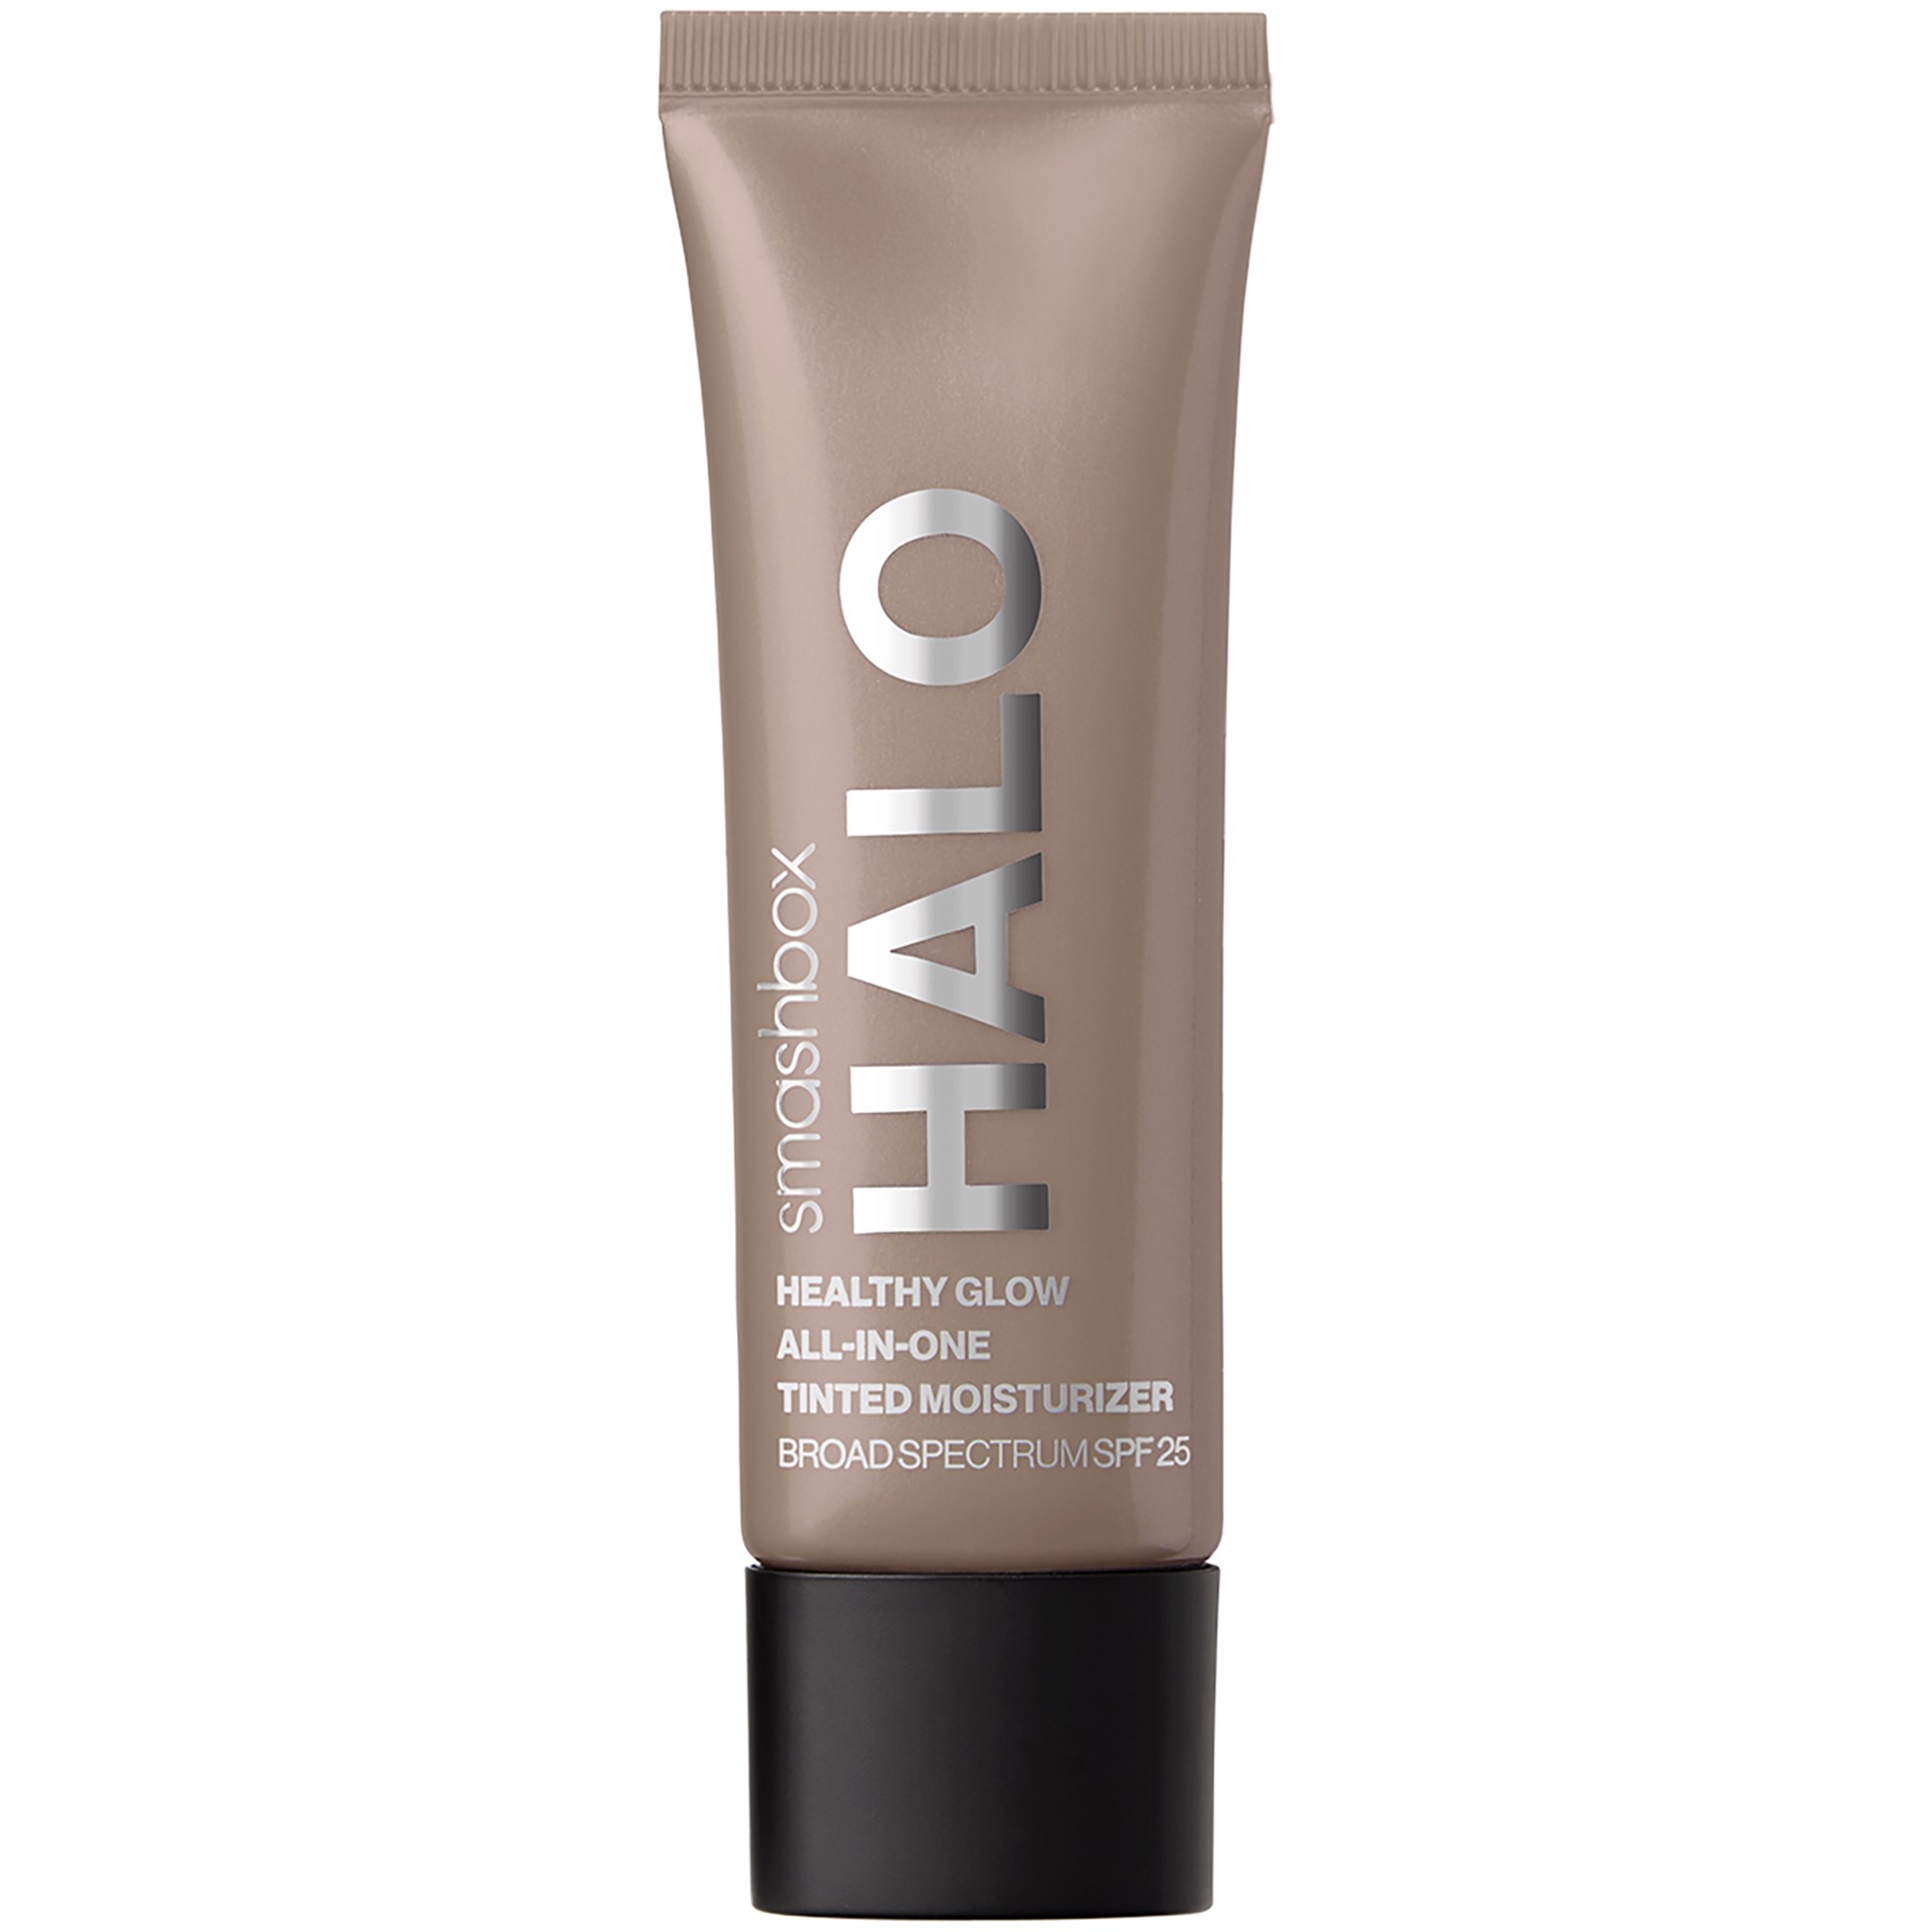 Smashbox Halo Mini Healthy Glow All-In-One Tinted Moisturizer Spf 25 D